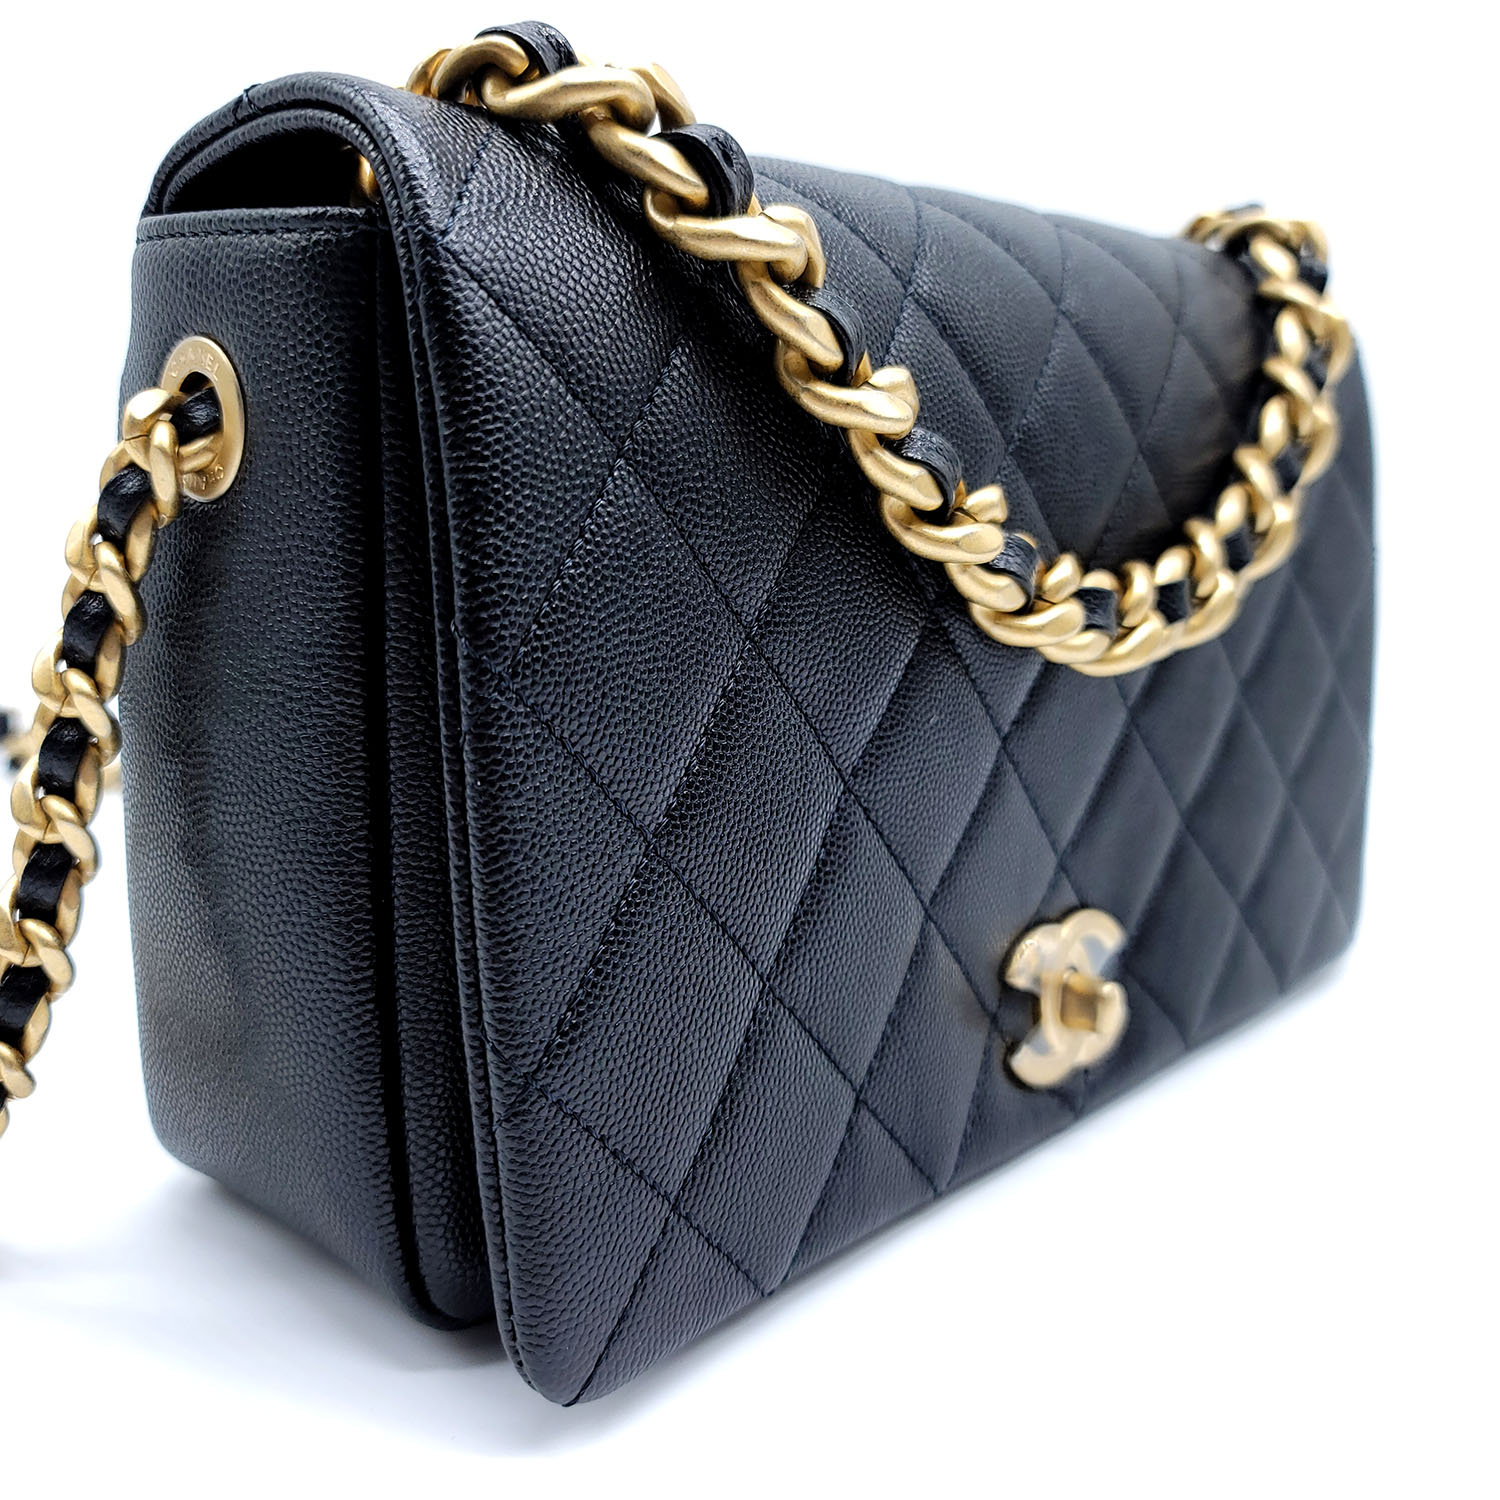 Chanel Diamond Quilted Flap Bag  Rent Chanel Handbags for $195/month